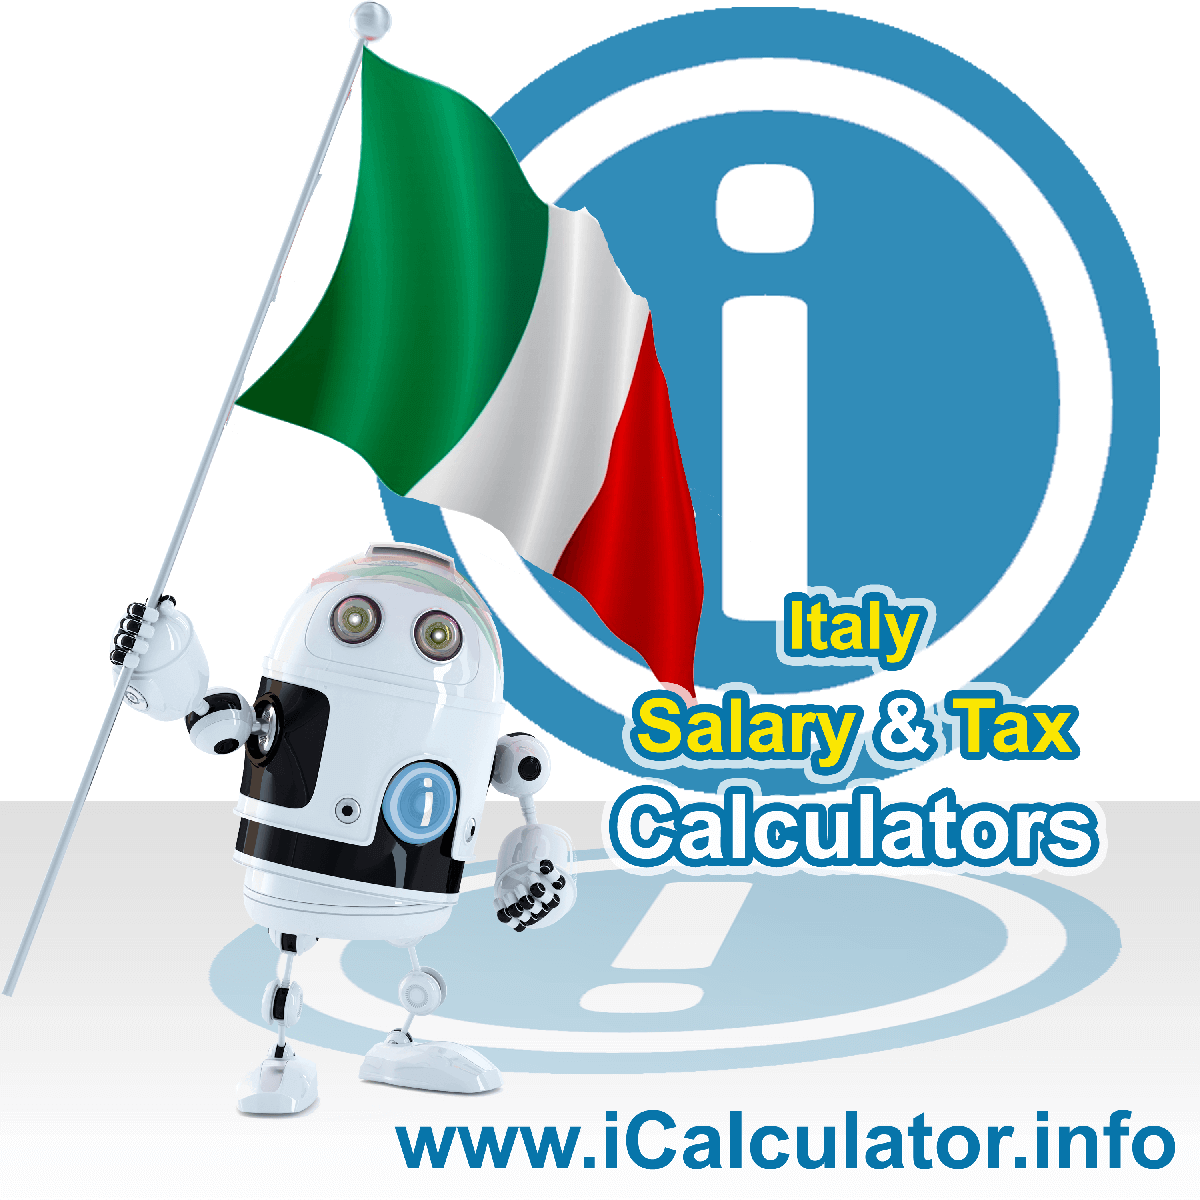 Italy Wage Calculator. This image shows the Italy flag and information relating to the tax formula for the Italy Tax Calculator